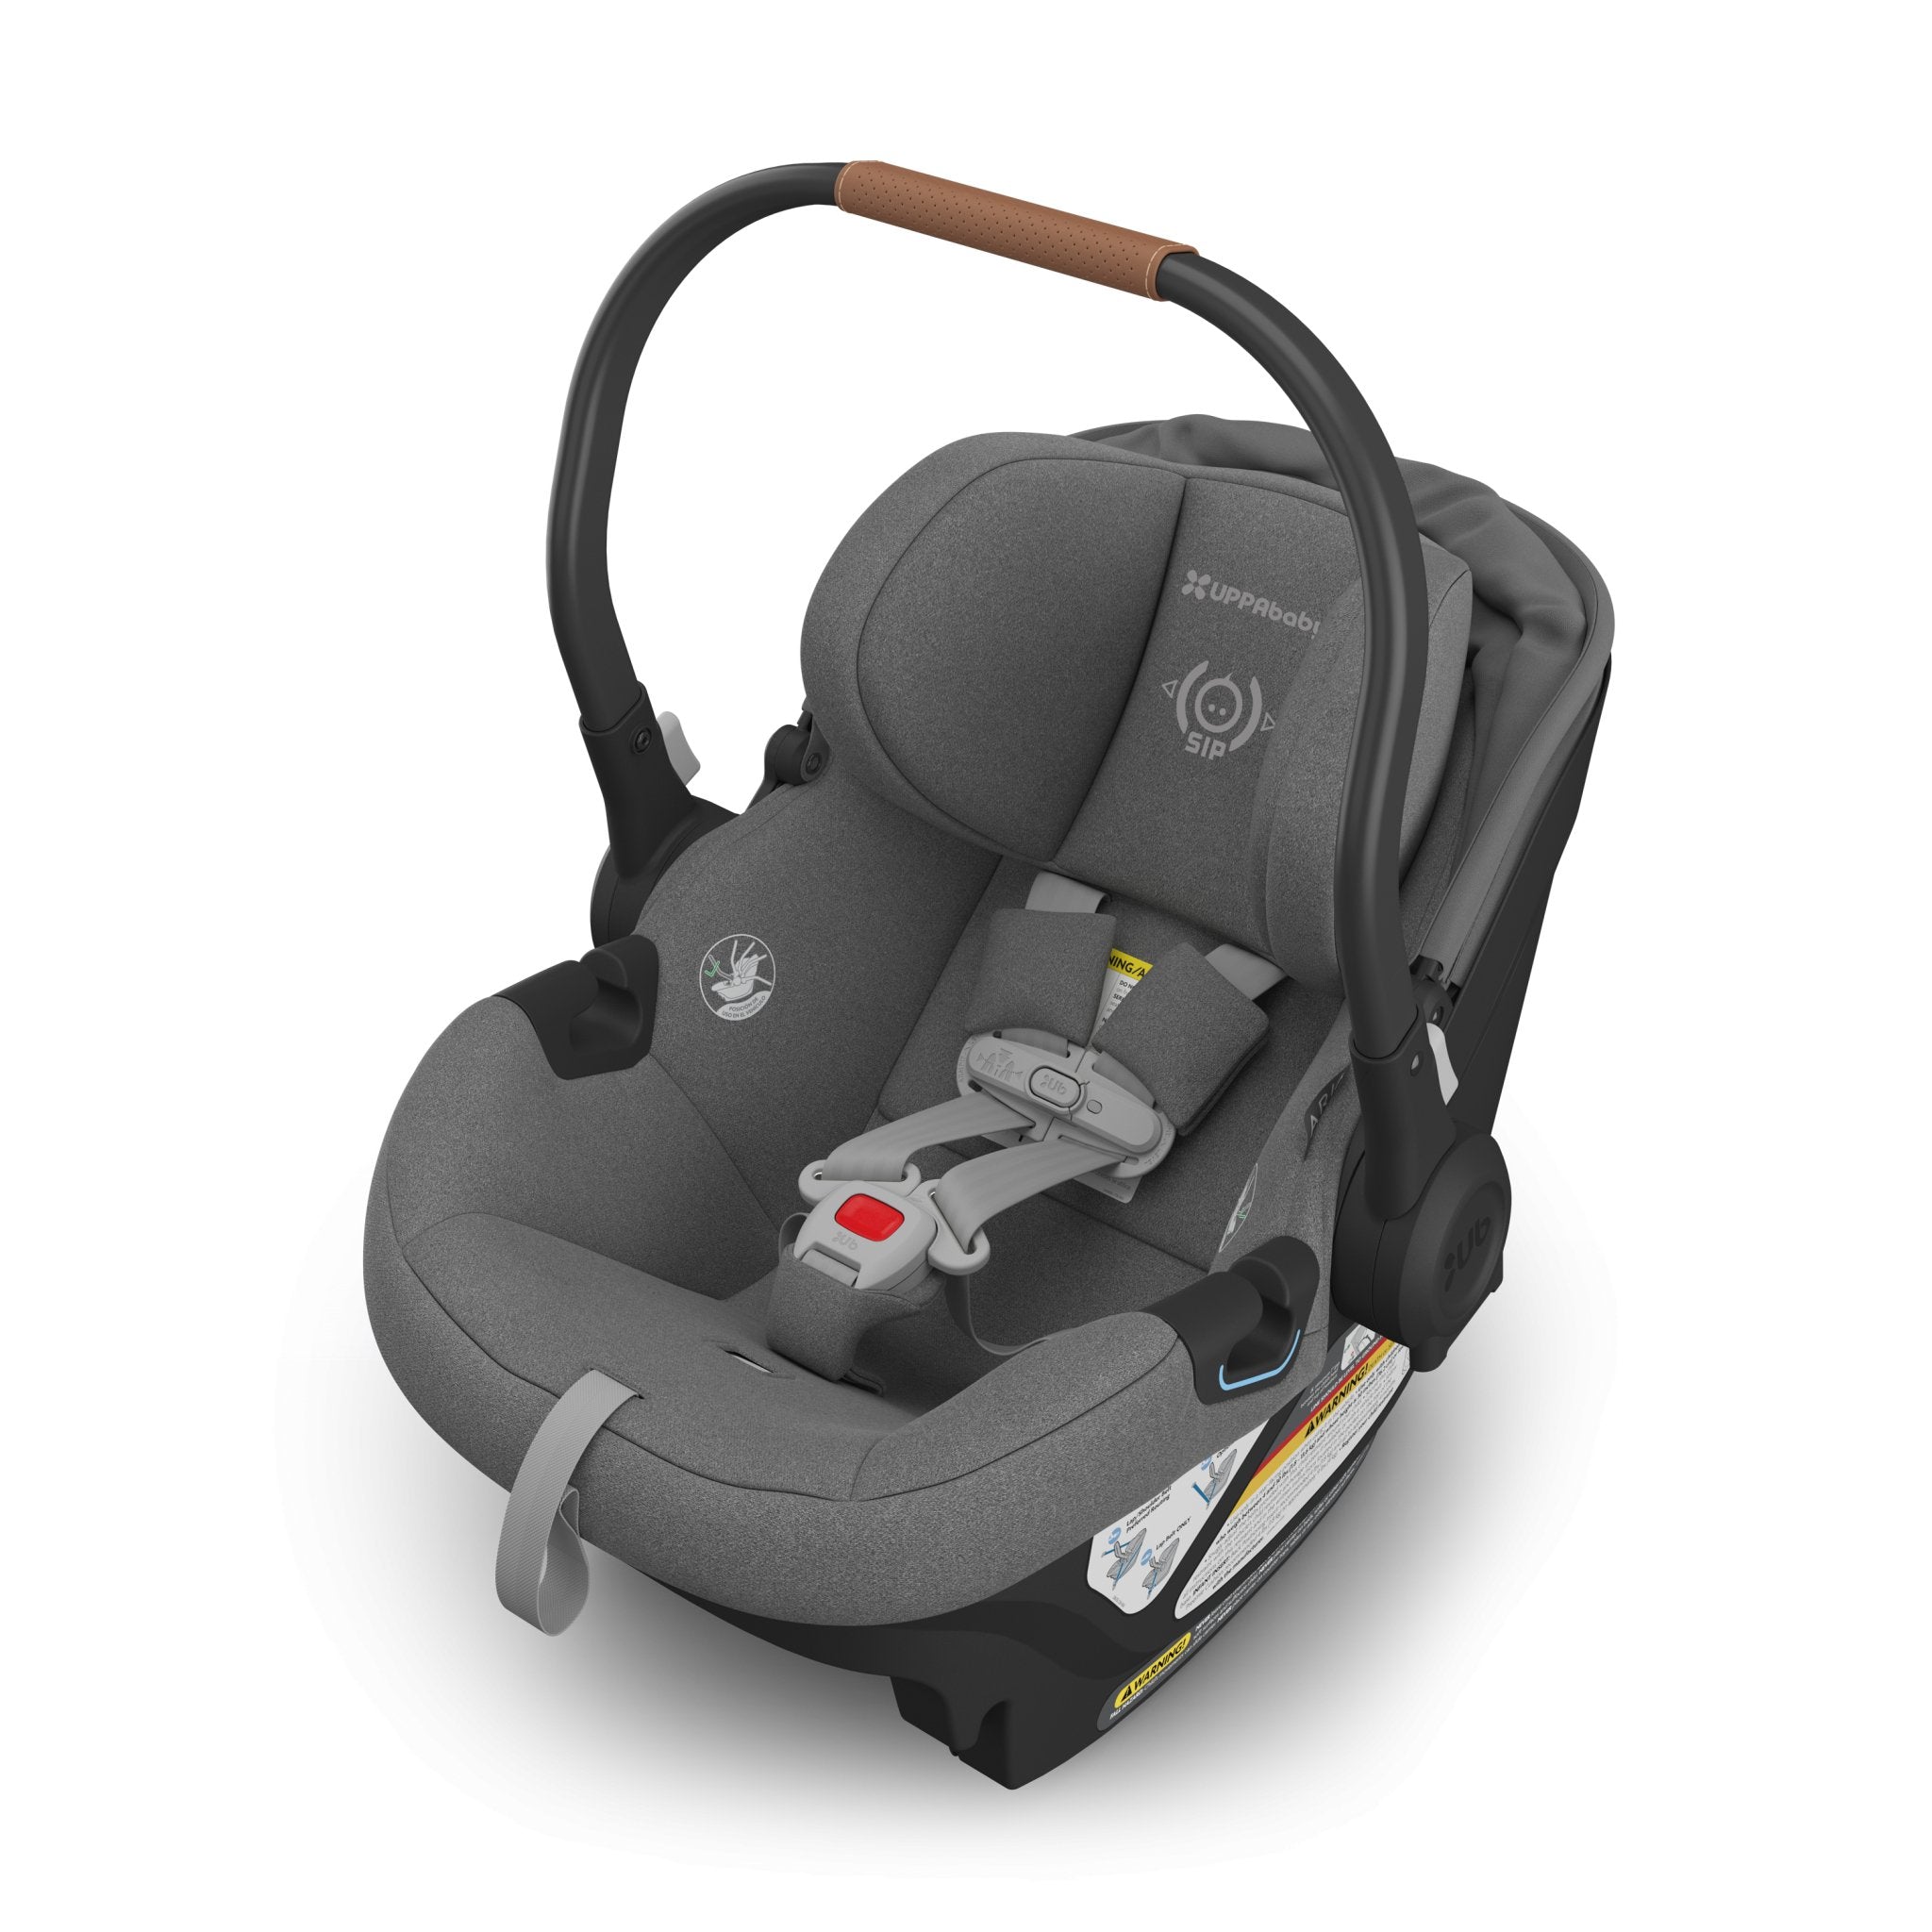 UPPAbaby ARIA Infant Car Seat - ANB Baby -810129596083$300 - $500